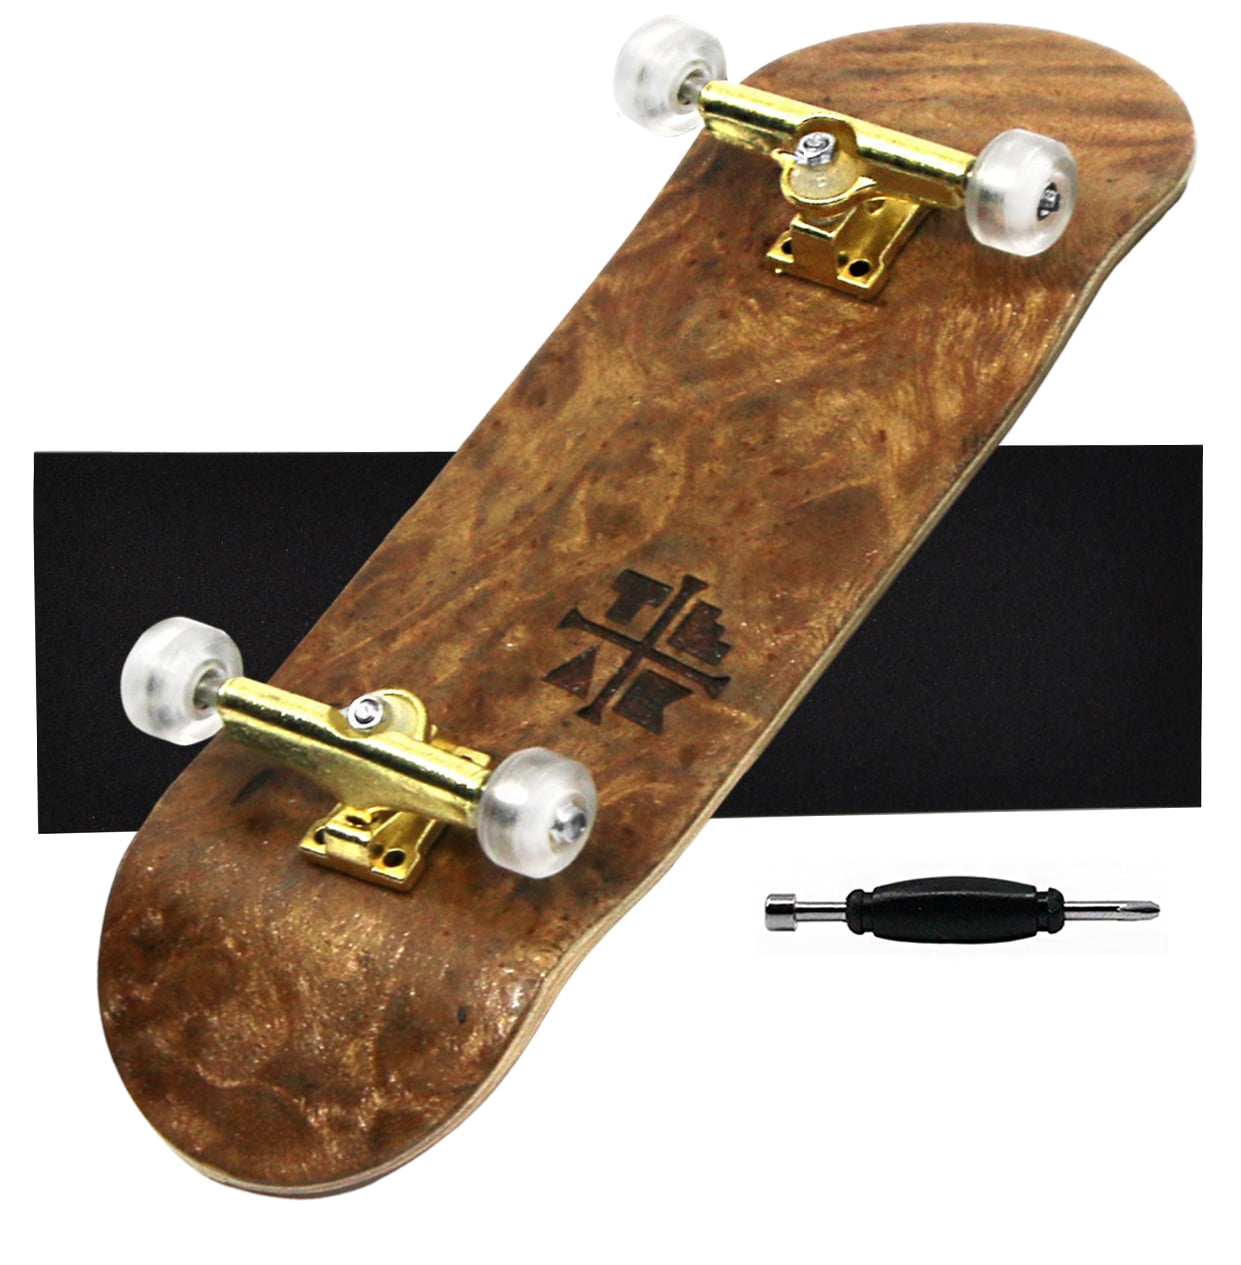 Bearing Wheels, and Trucks Pro Board Shape and Size 32mm x 97mm Handmade Wooden Board Blue Blizzard Edition PROlific Complete Fingerboard with Upgraded Components 